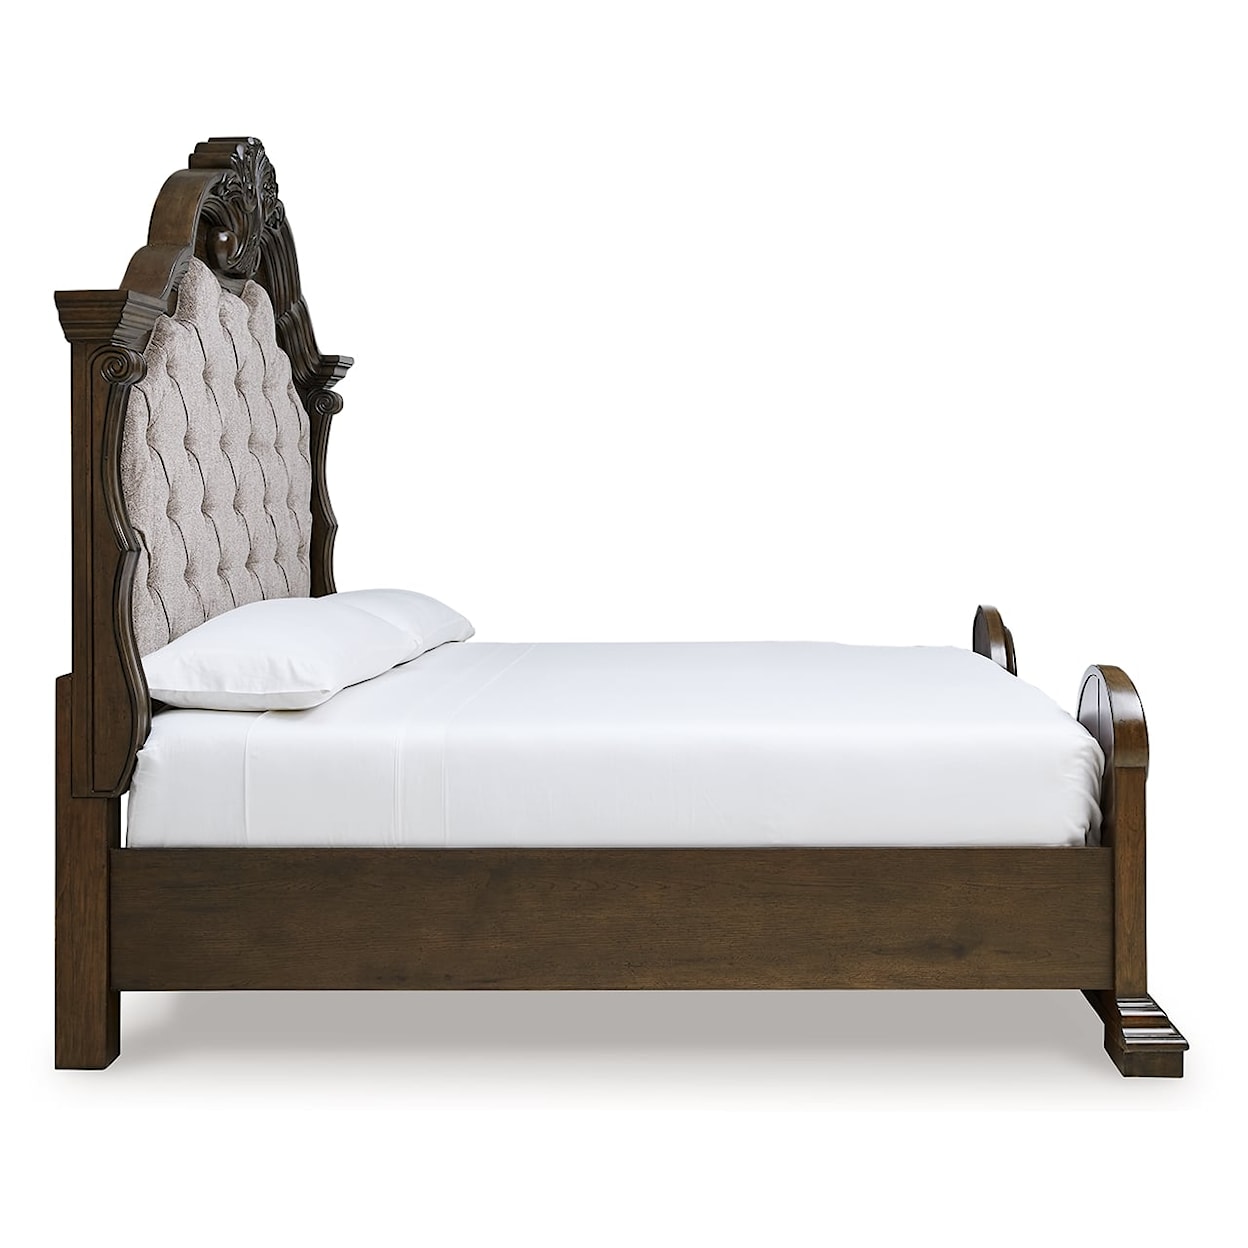 Ashley Furniture Signature Design Maylee Queen Upholstered Bed